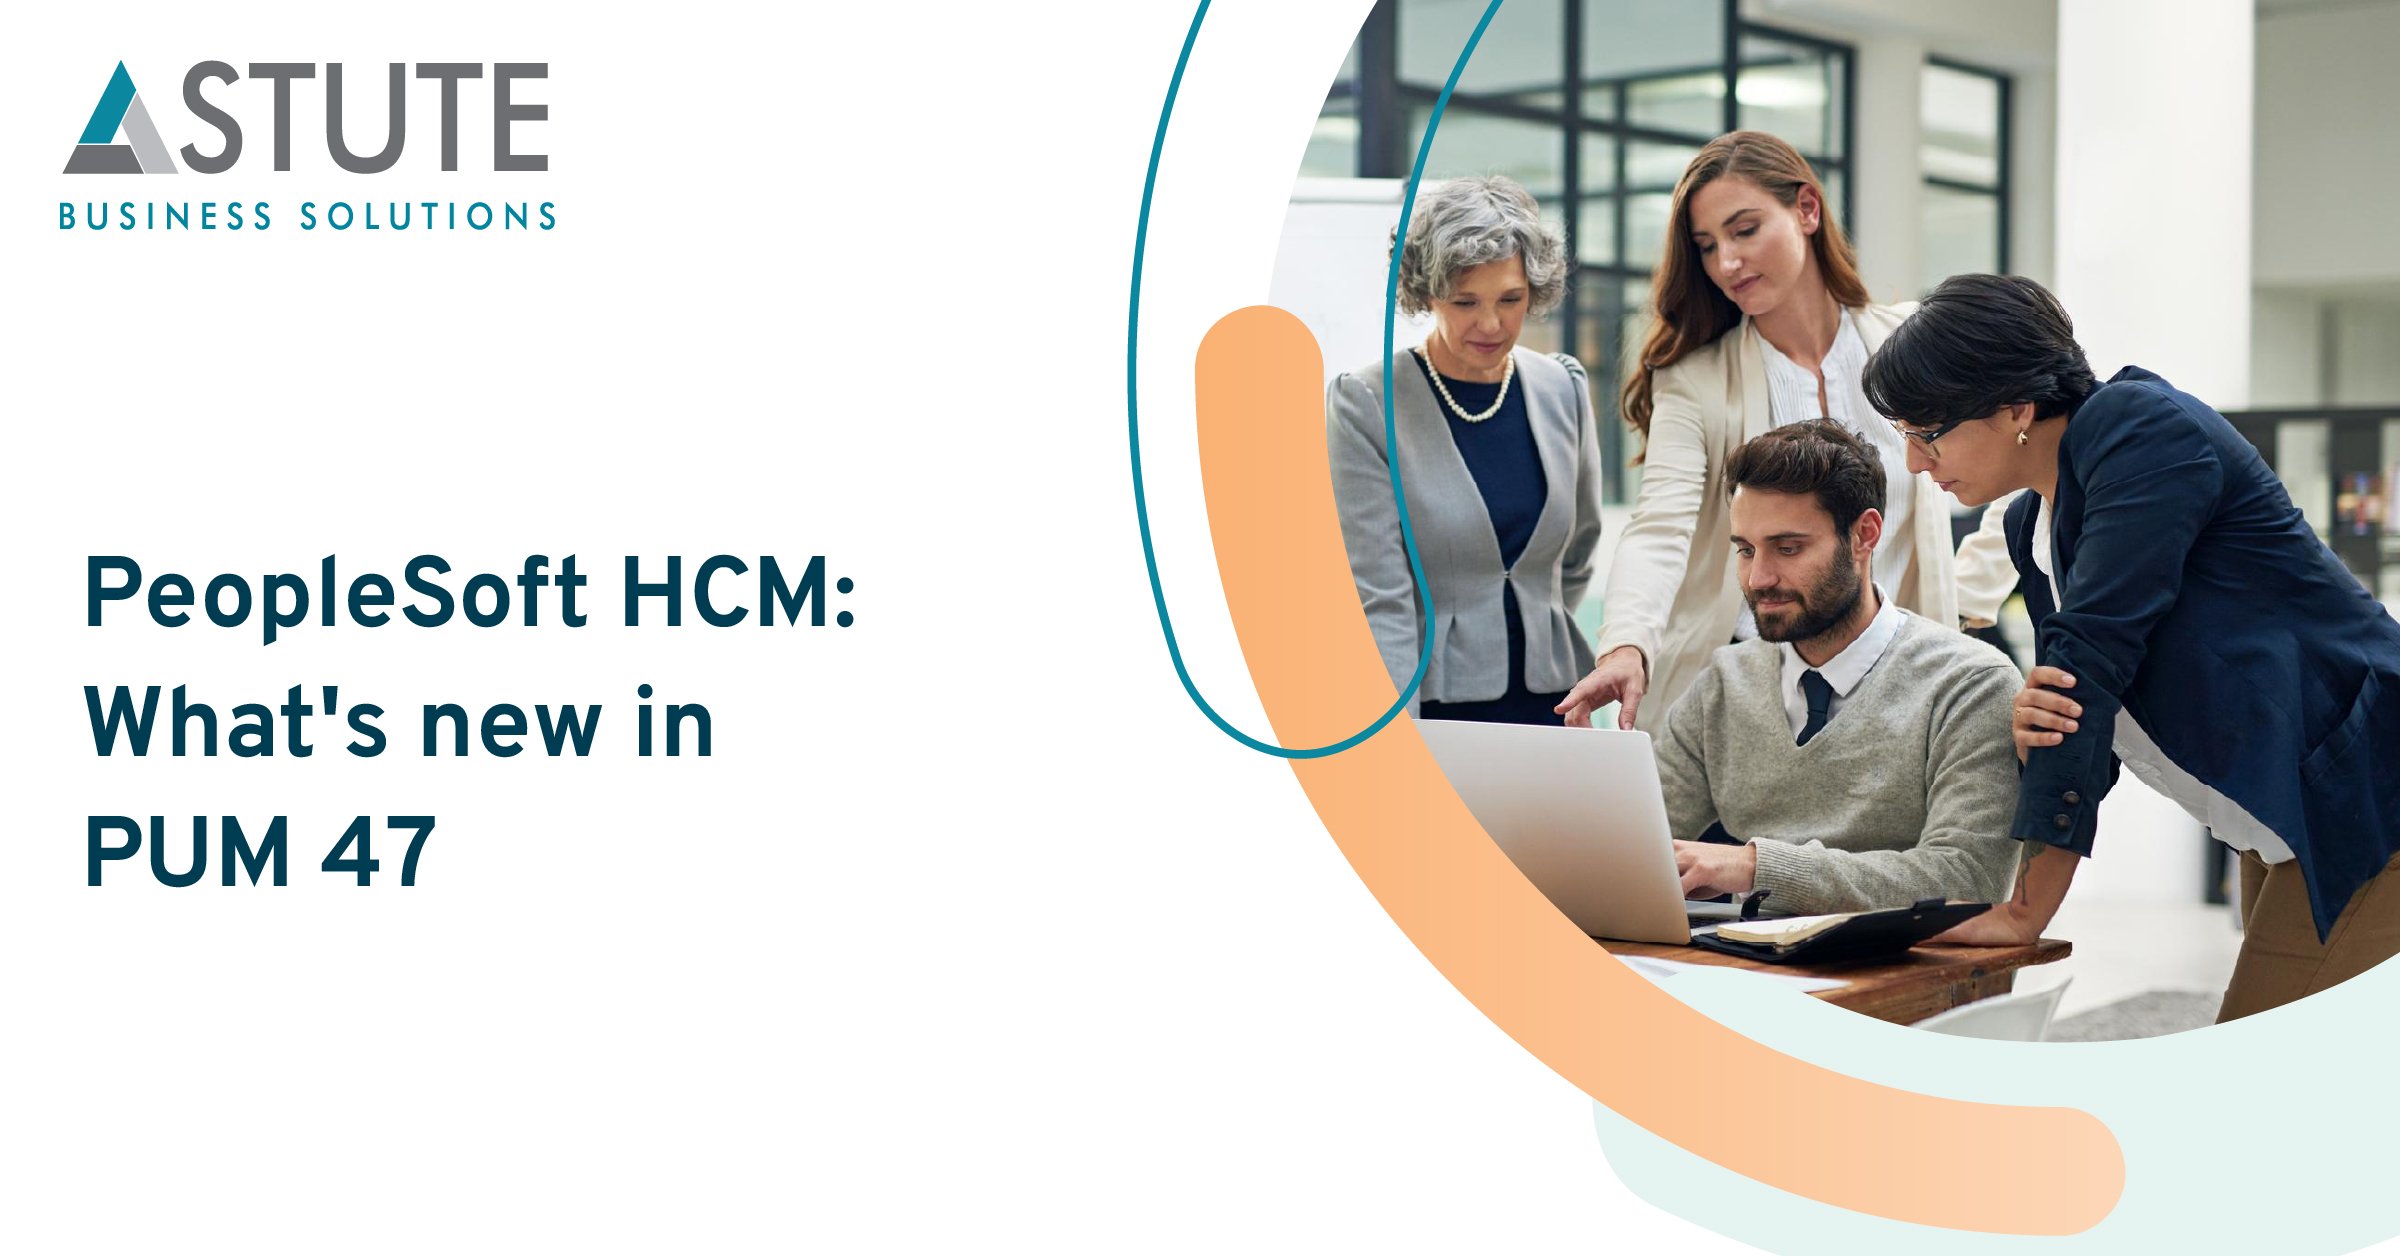 PeopleSoft HCM: What's new in PUM 47